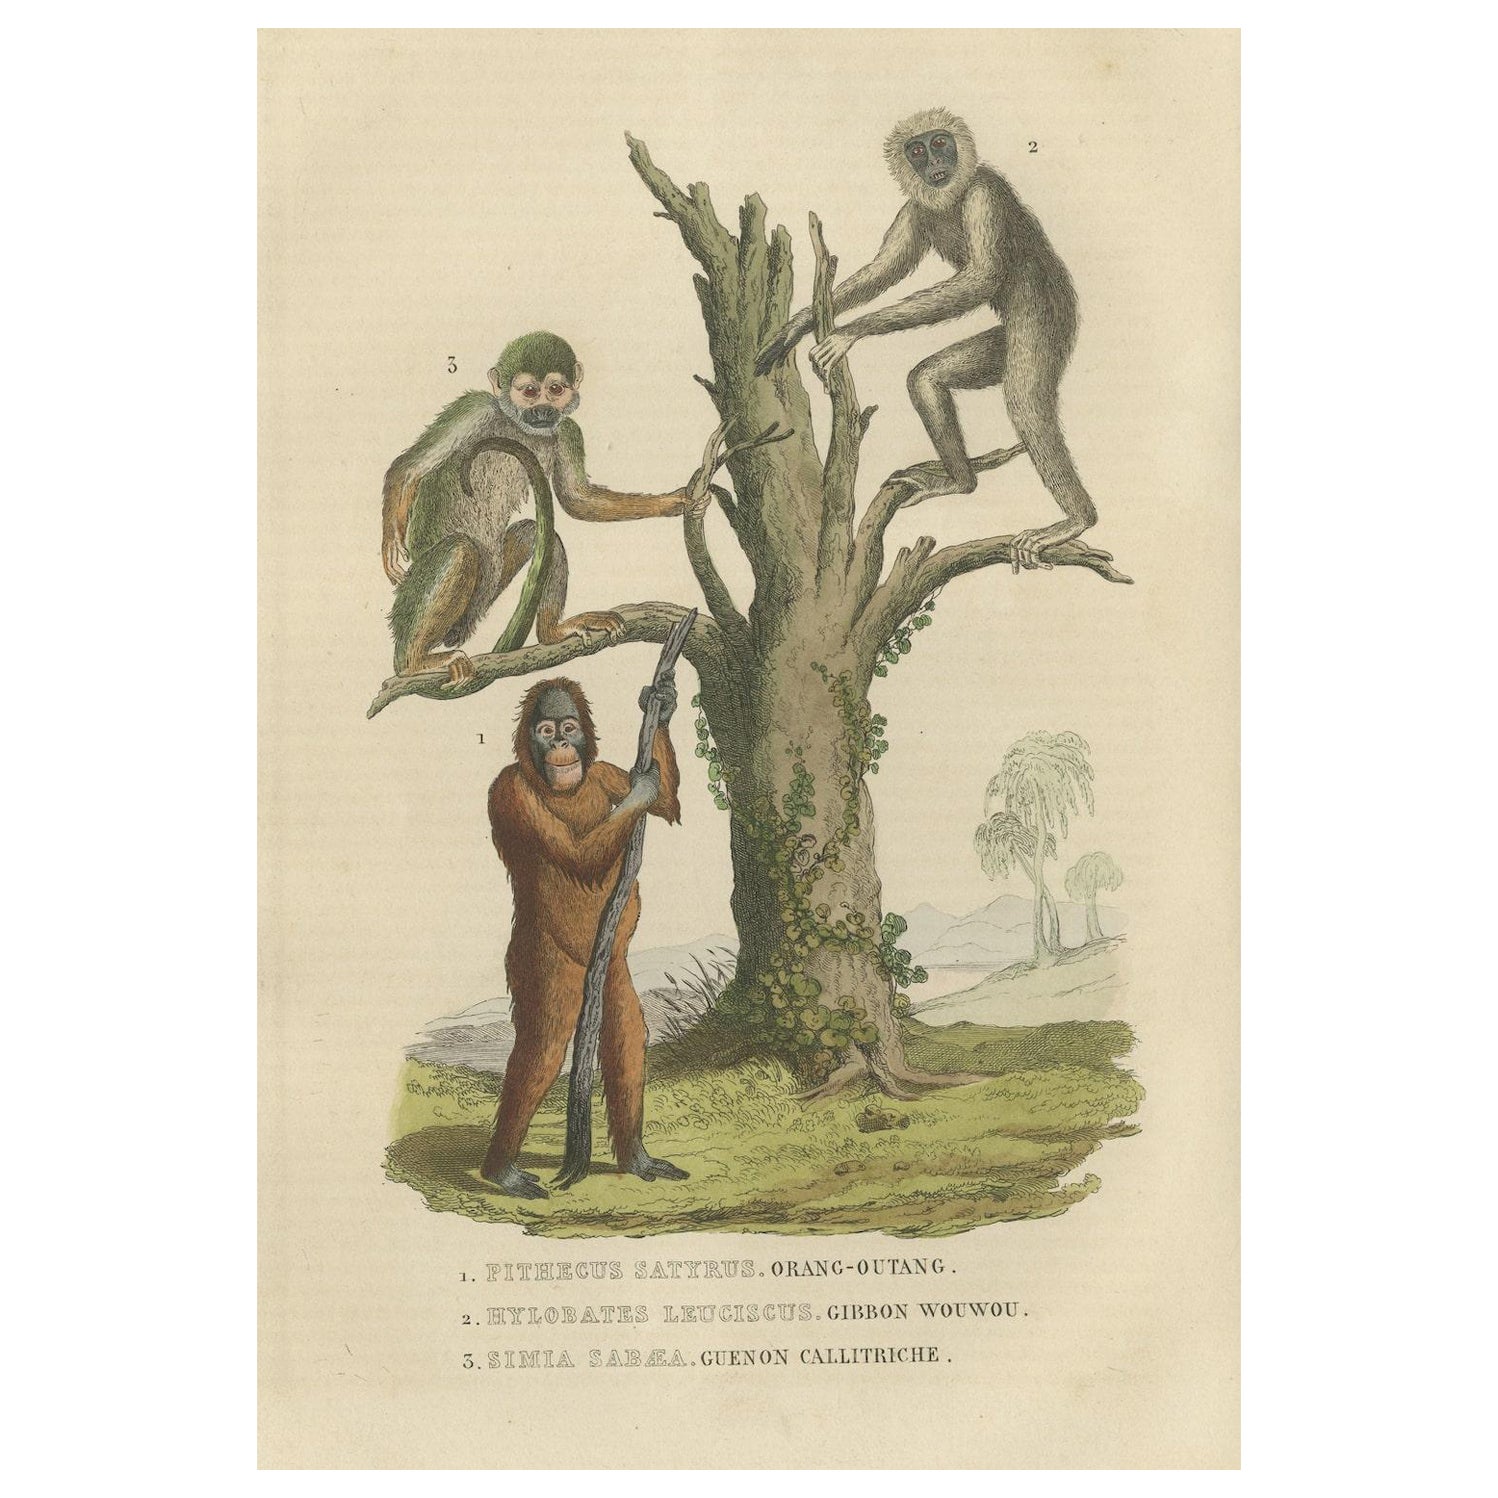 Old Print of a Red or Asiatic Orangoutan, Javan Silvery Gibbon and Green Monkey For Sale